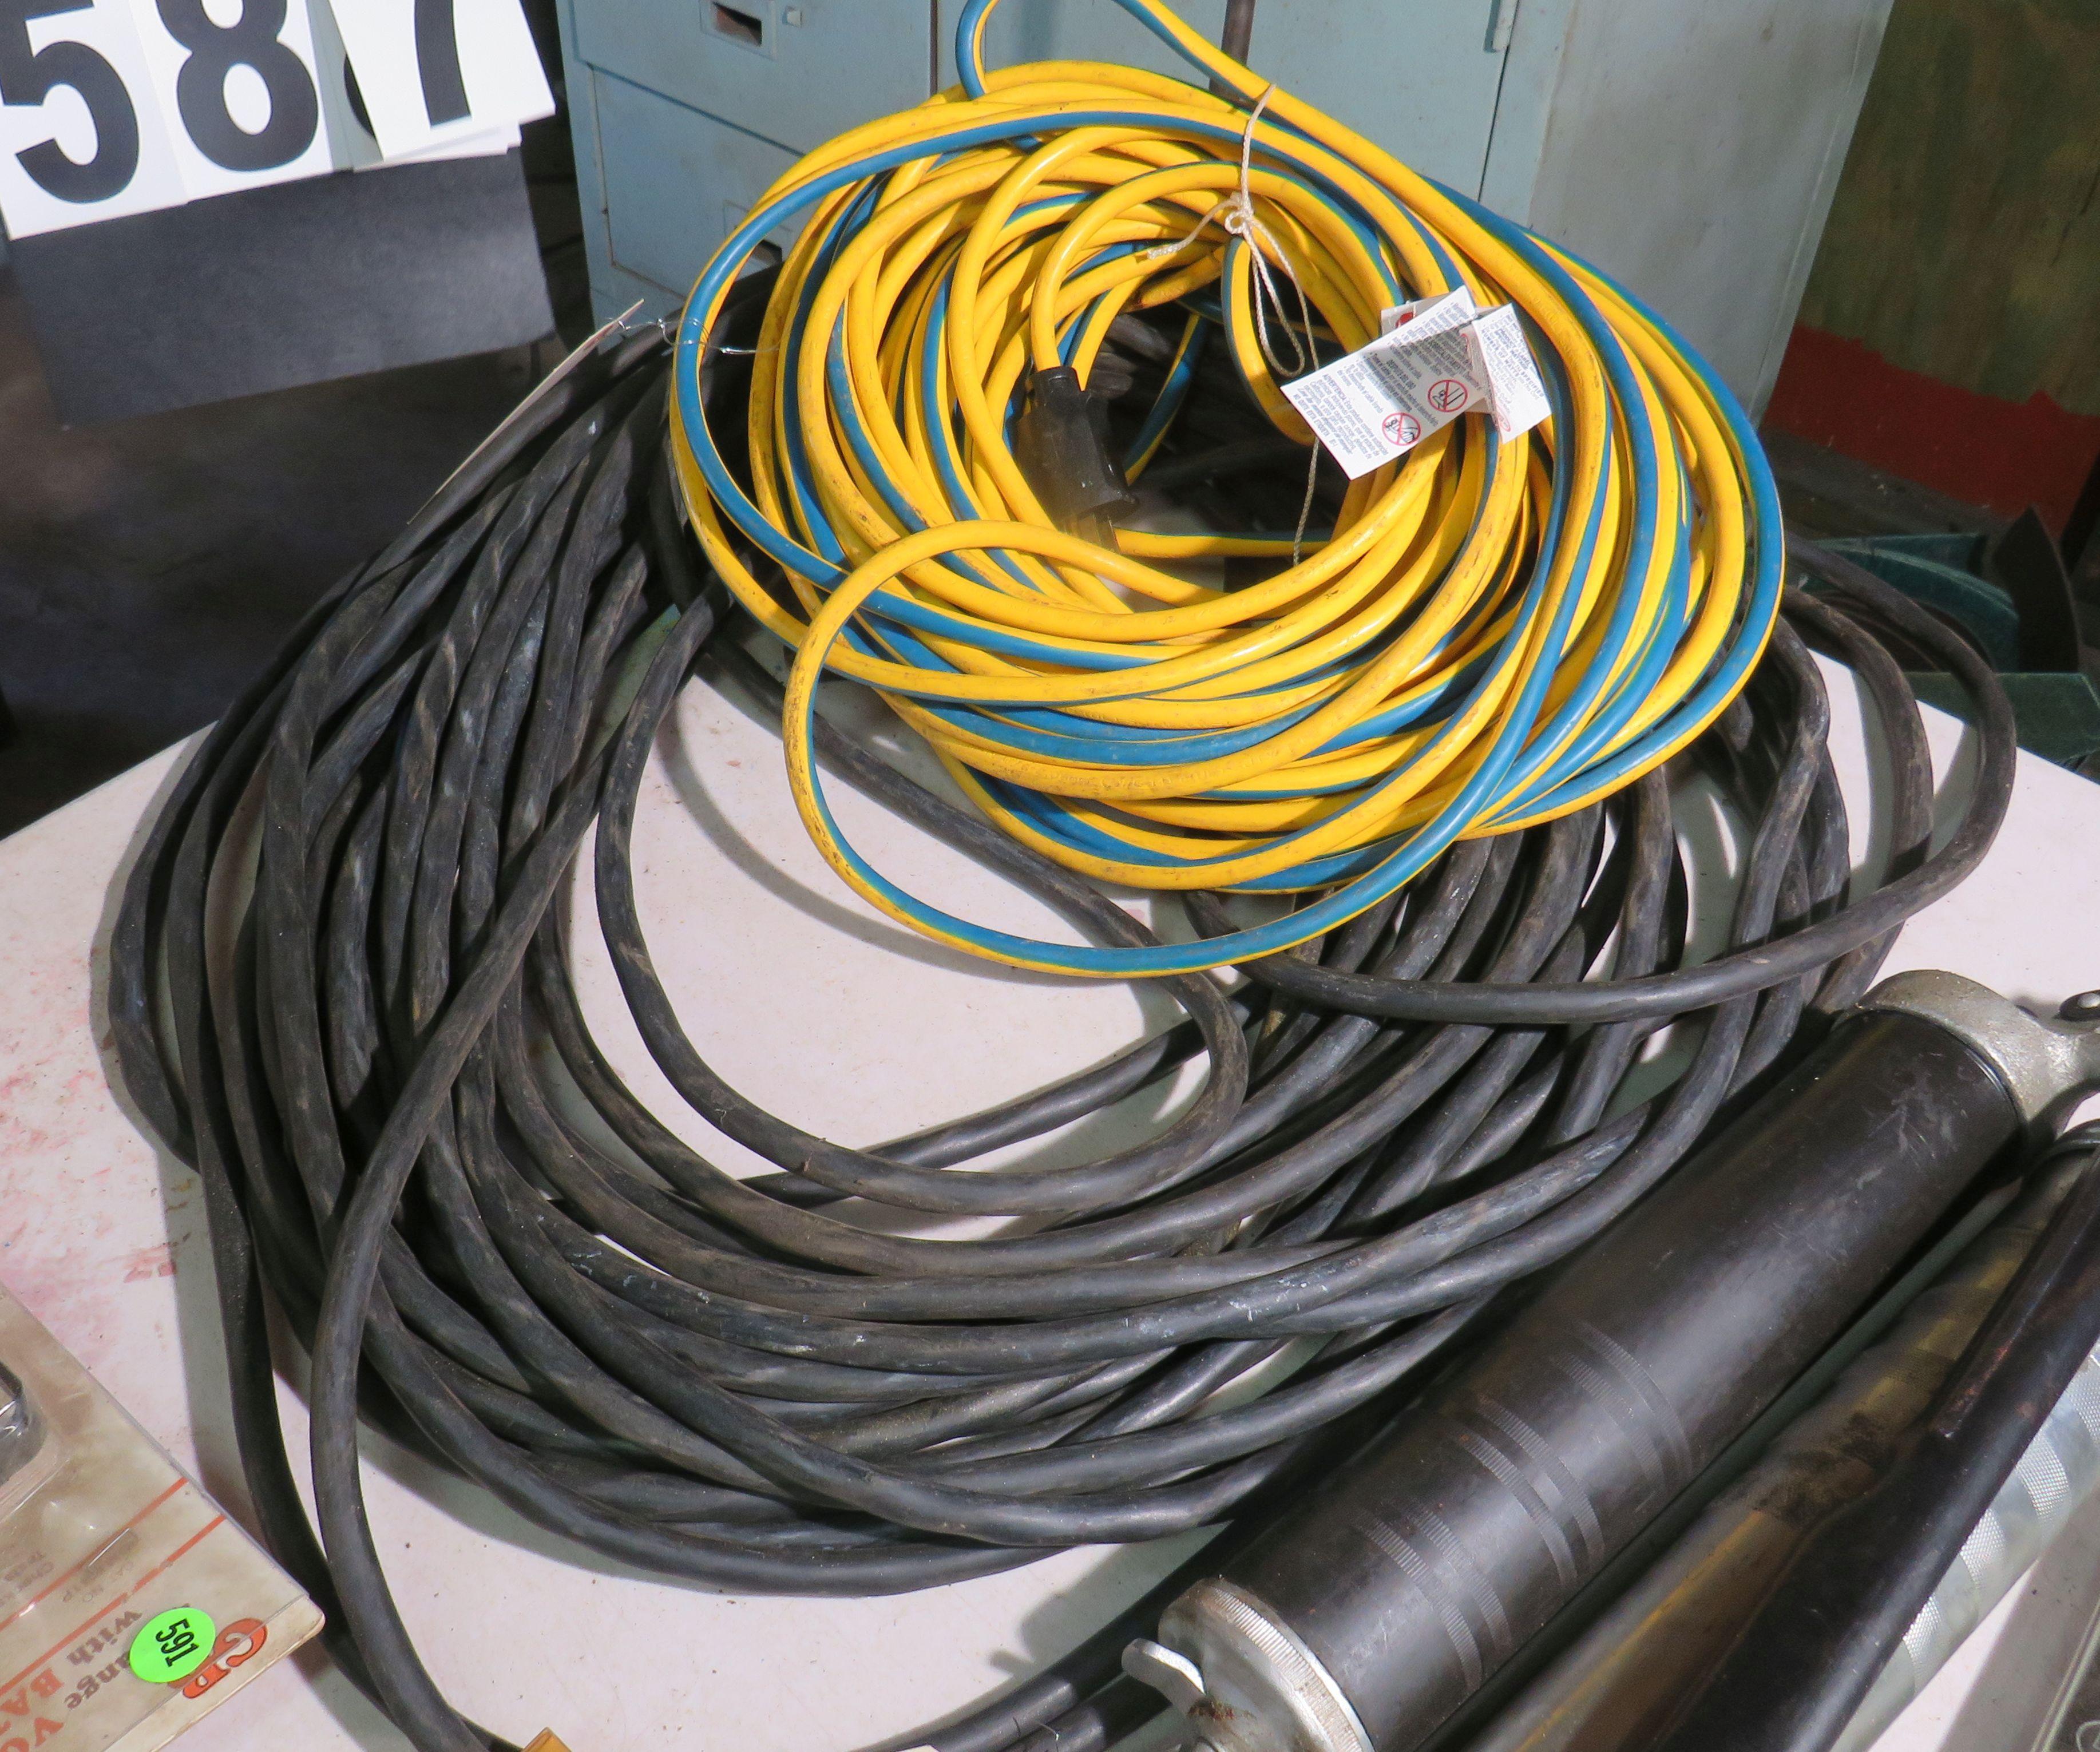 100 used extension cords